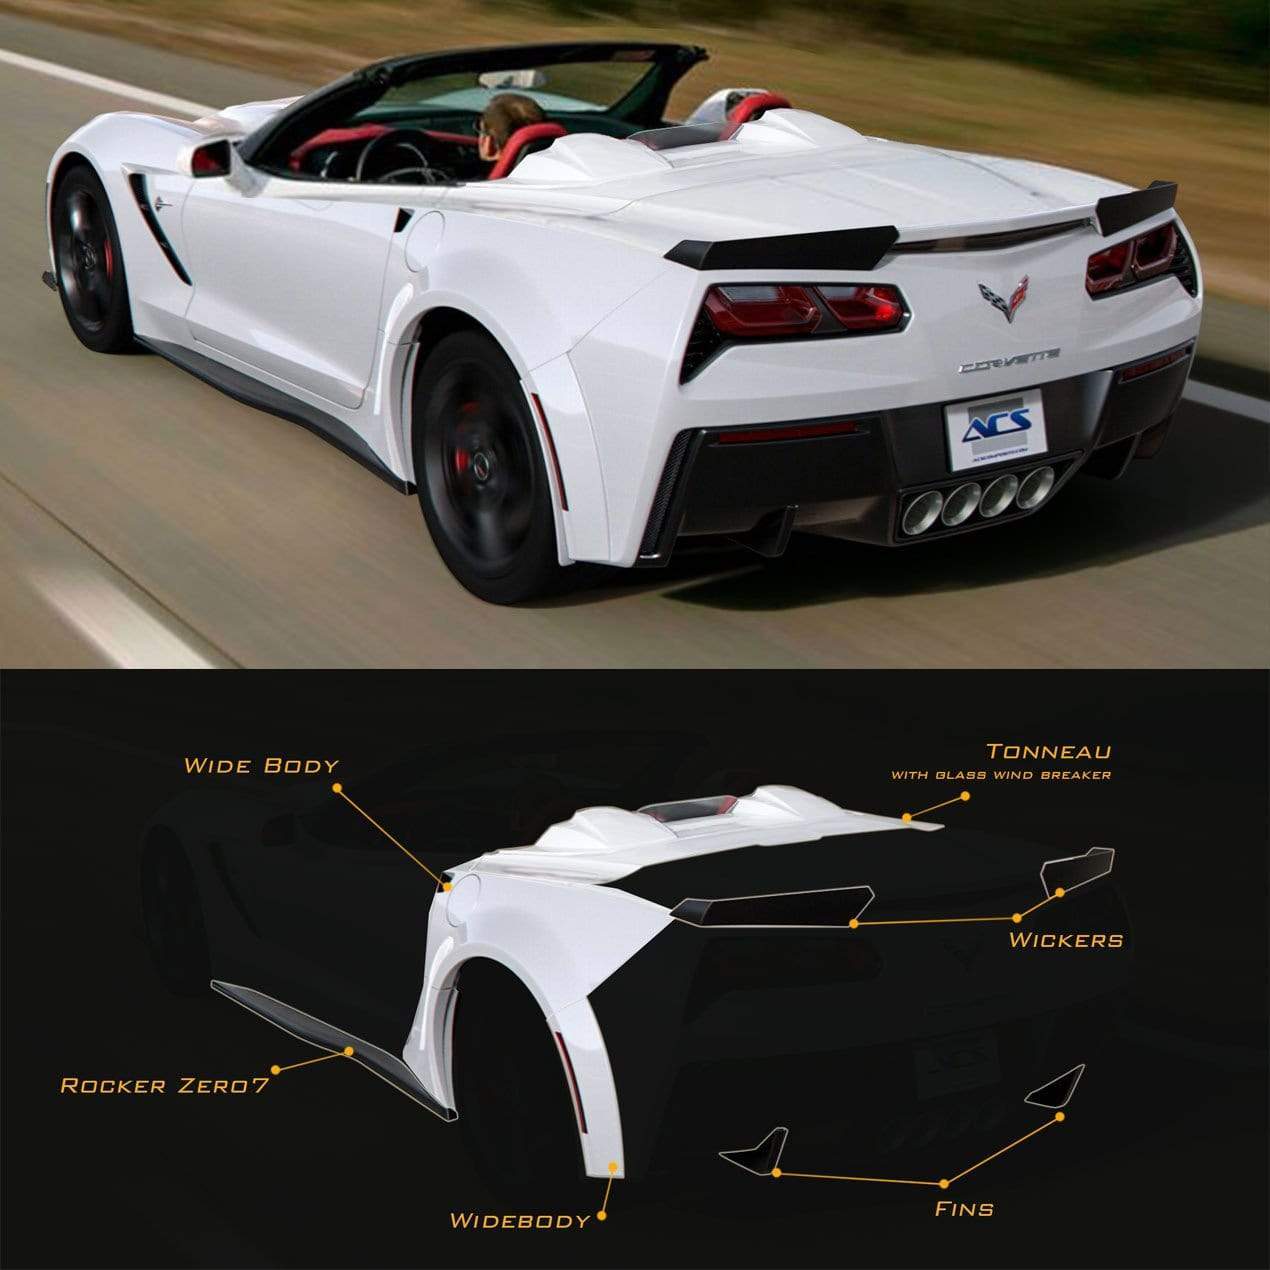 ACS Composite Convertible Rear Widebody Kit for C7 Corvette Stingray 45-4-101 PRM - Adds 40mm Width, Accommodates 20x12 Wheels and P335-25-20 Tires